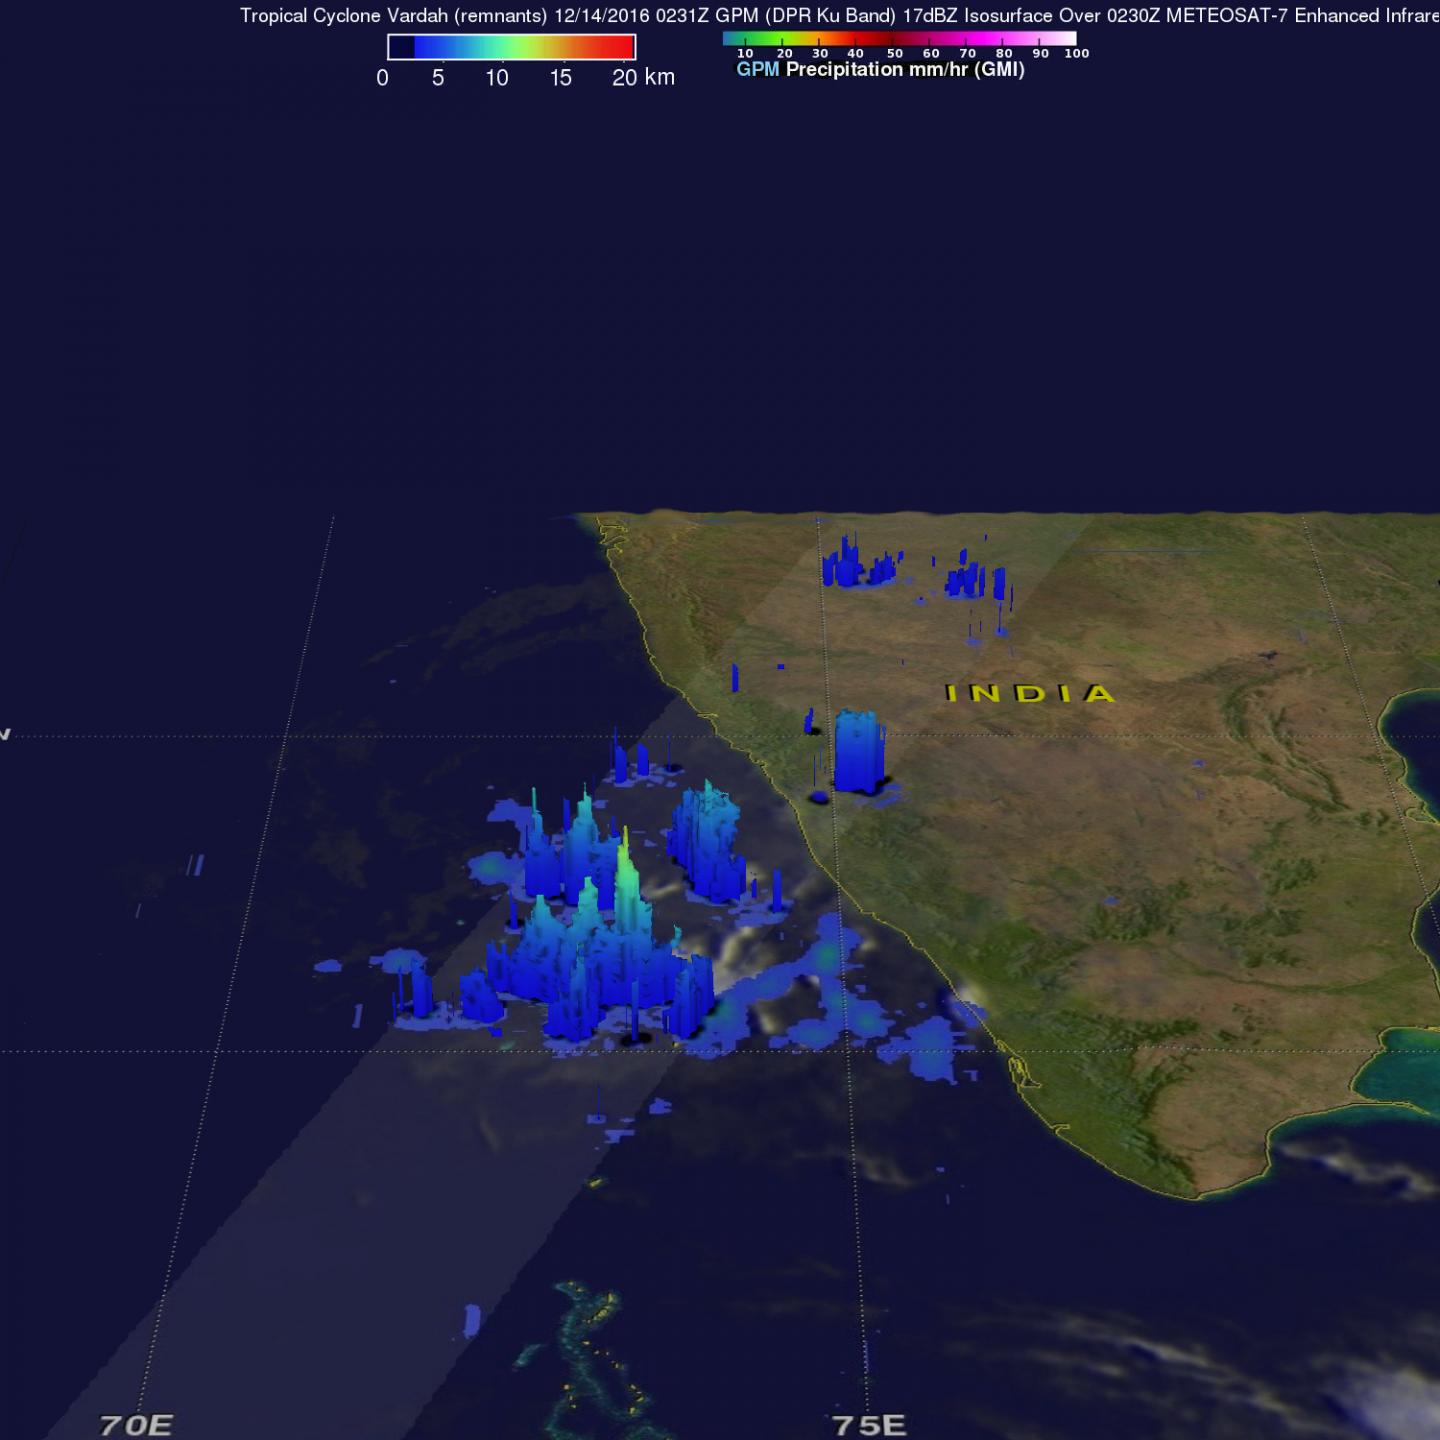 GPM Image of Vardah's Remnants